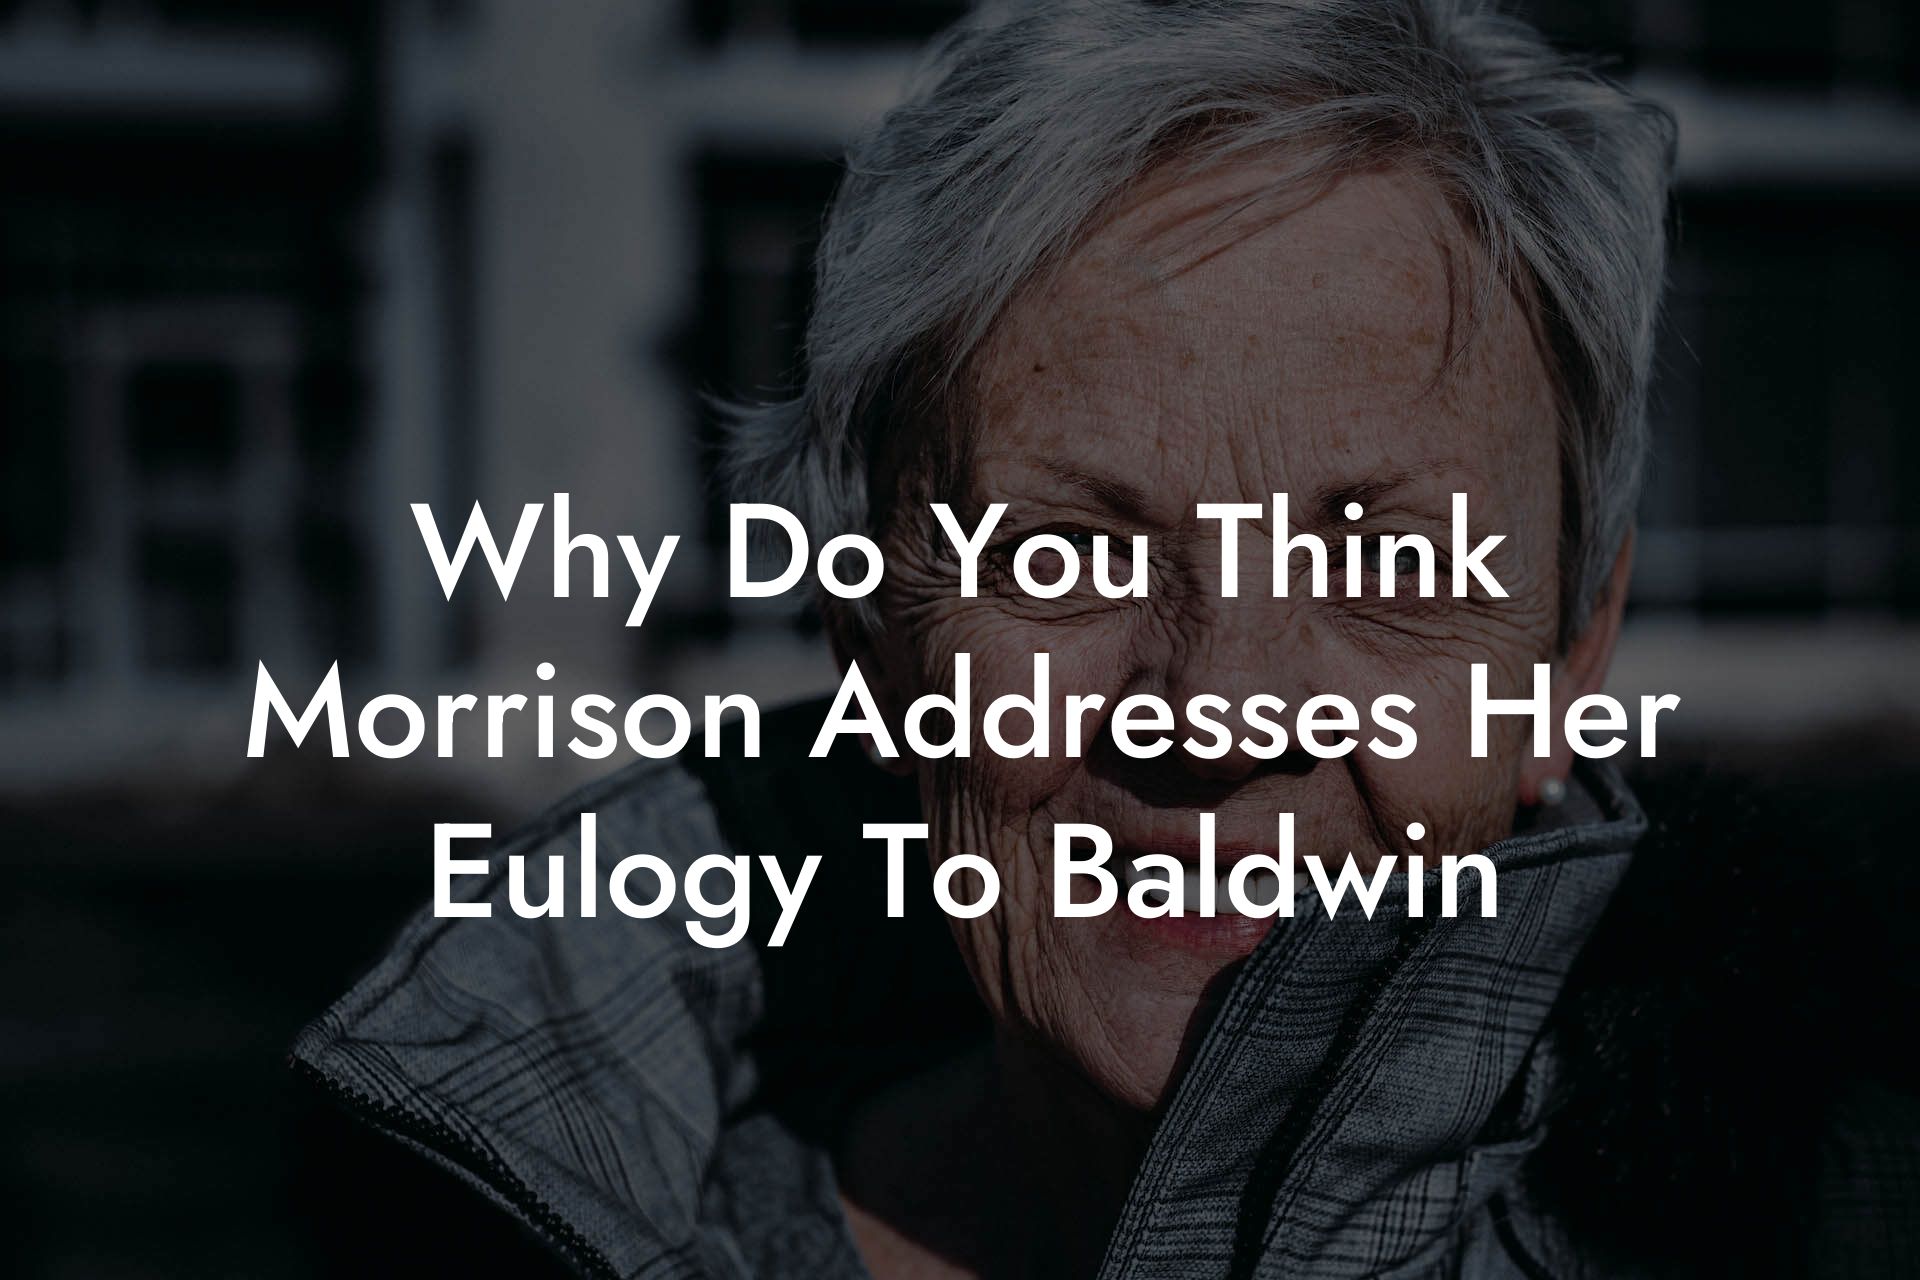 Why Do You Think Morrison Addresses Her Eulogy To Baldwin